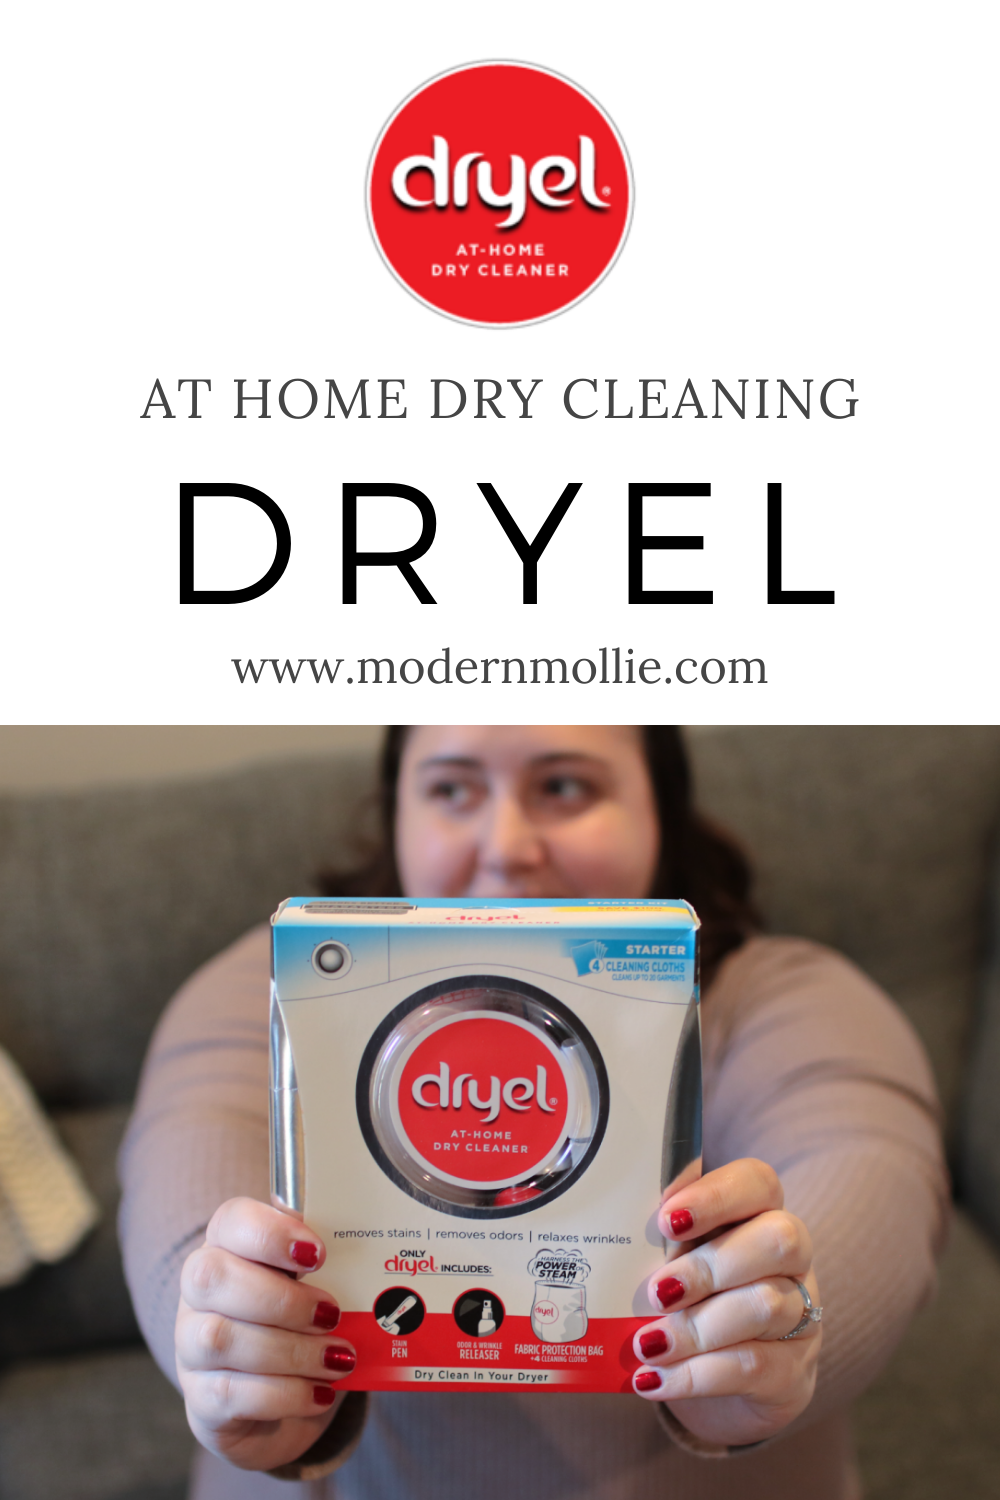 Dryel Dry Cleaning 